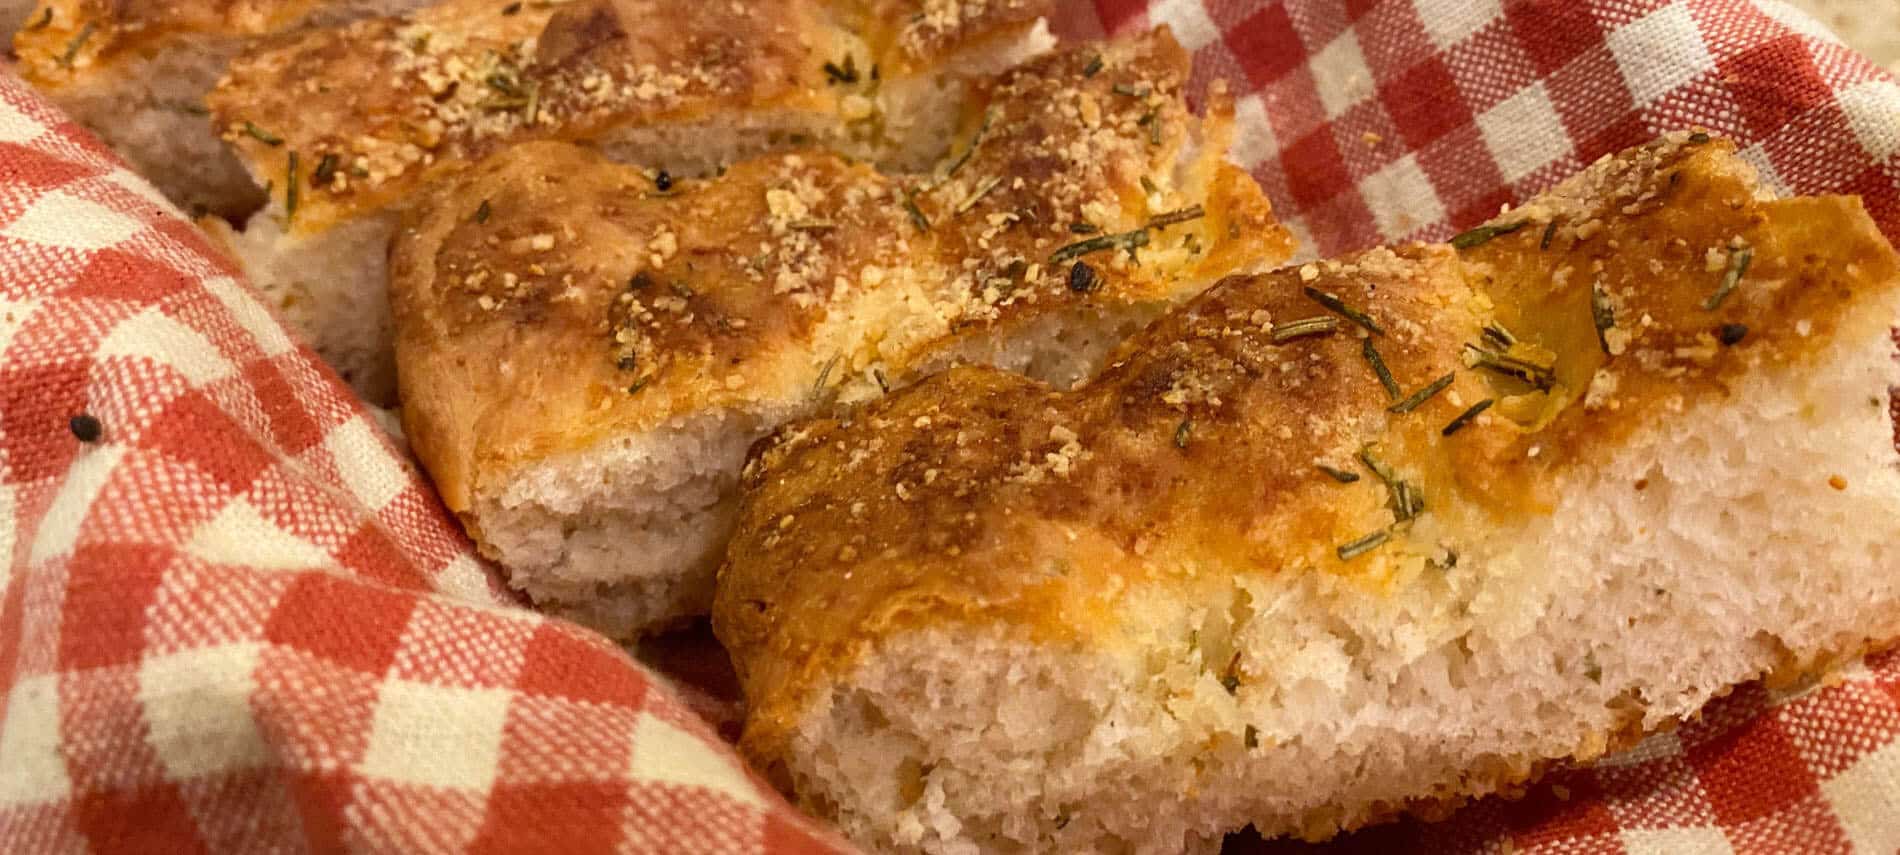 Slices of focaccia bread with rosemary and sea salt on a red and white checkered cloth